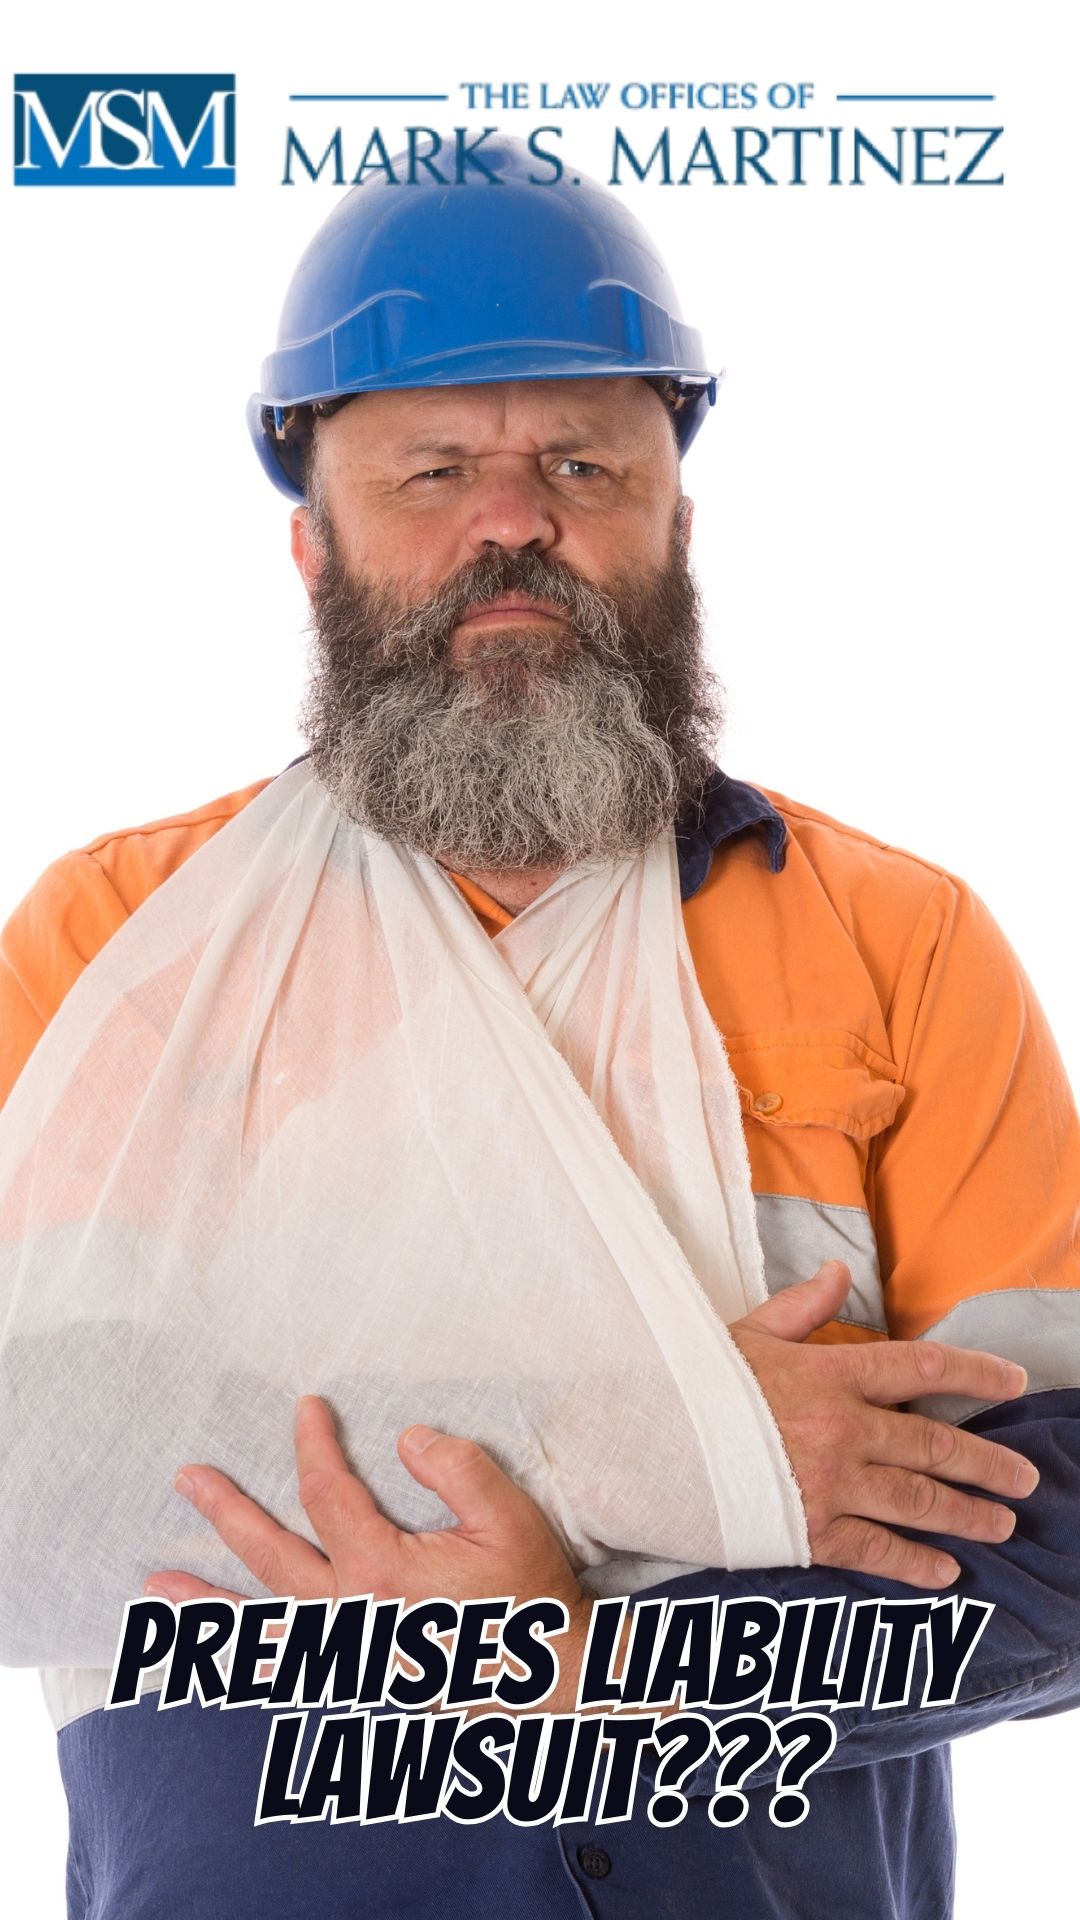 What To Do When an Employee is Injured at Work